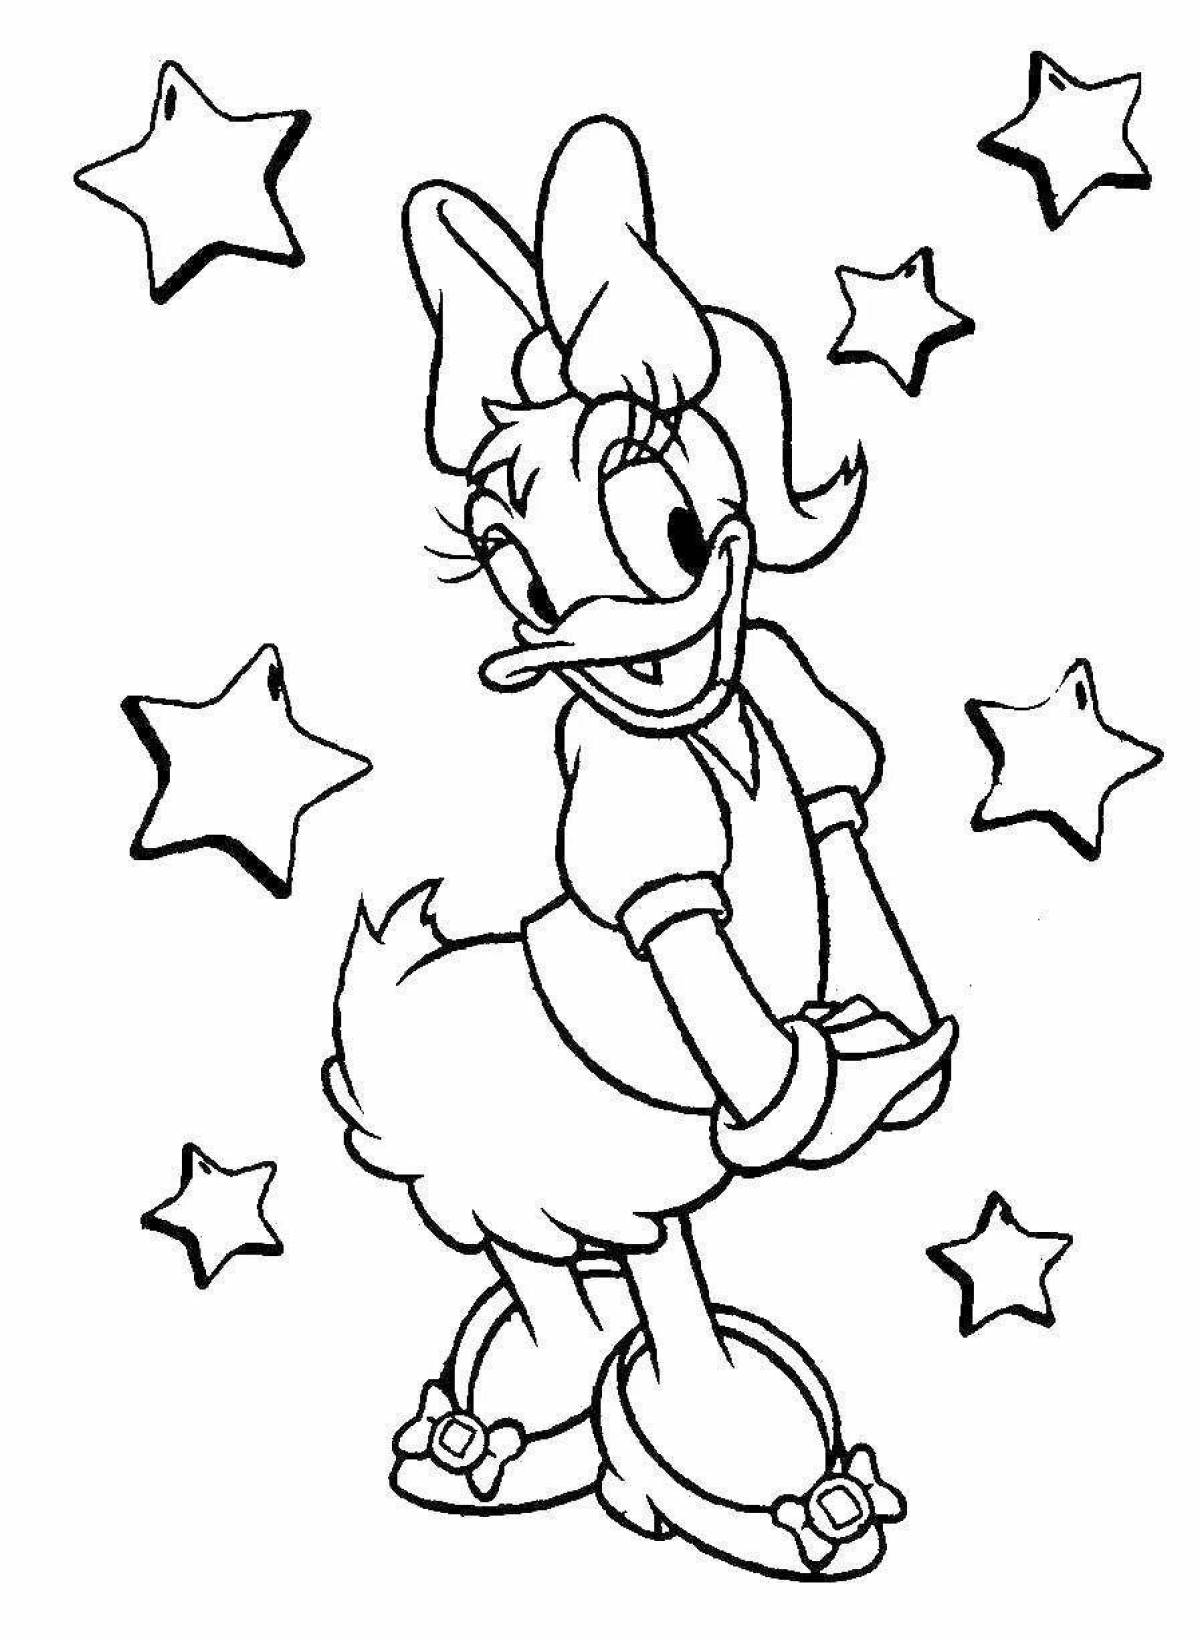 Coloring page adorable donut